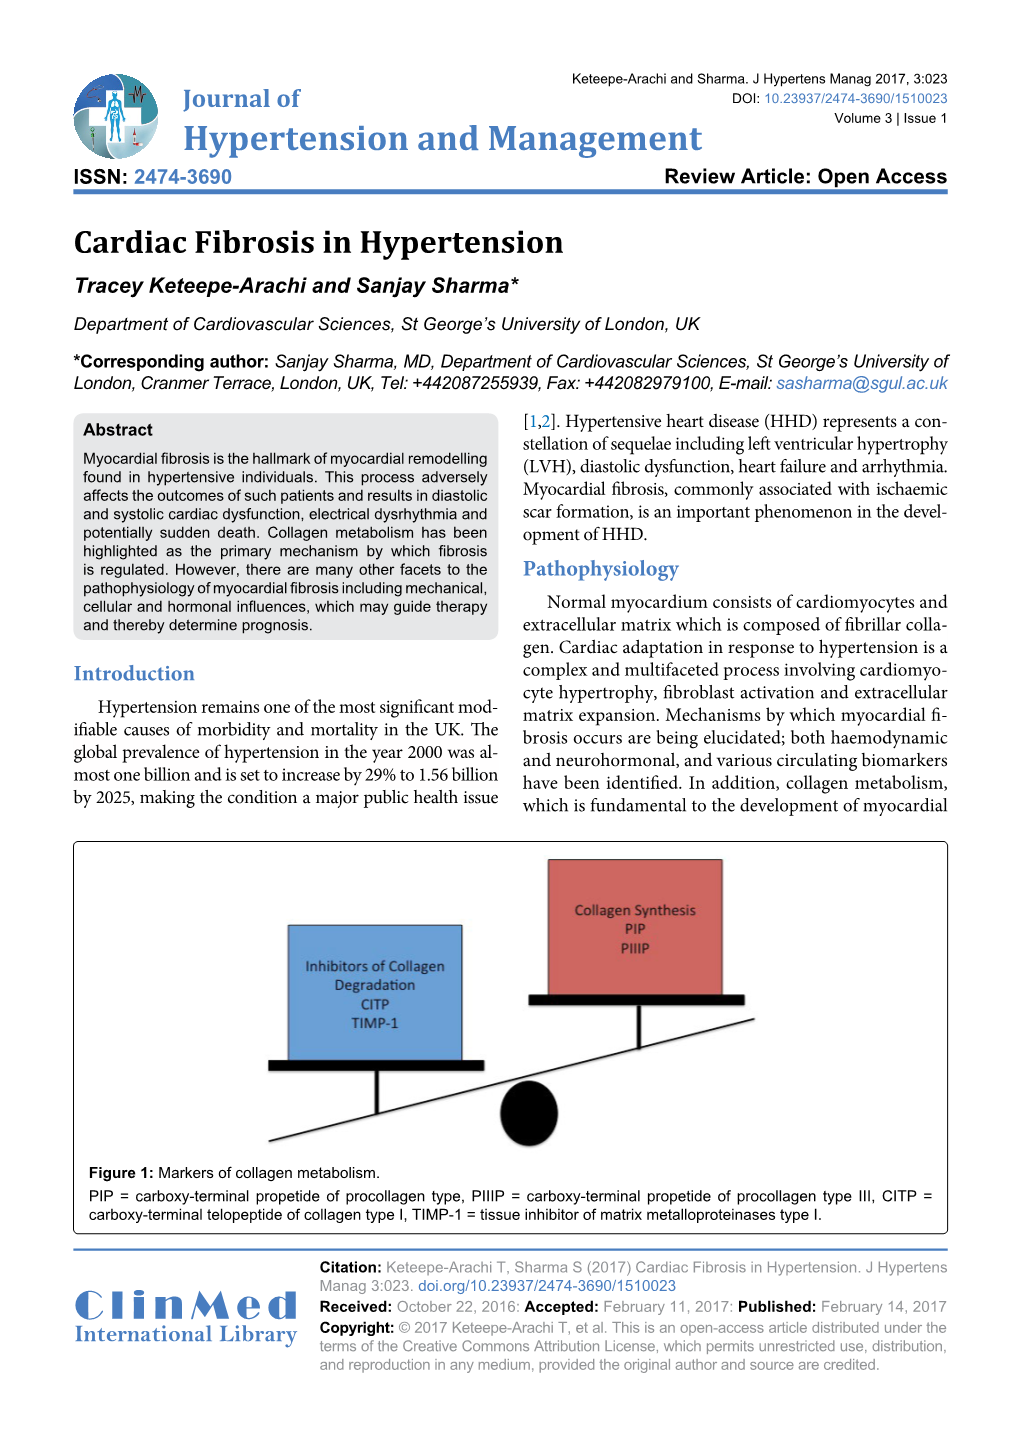 Cardiac Fibrosis in Hypertension Tracey Keteepe-Arachi and Sanjay Sharma* Department of Cardiovascular Sciences, St George’S University of London, UK